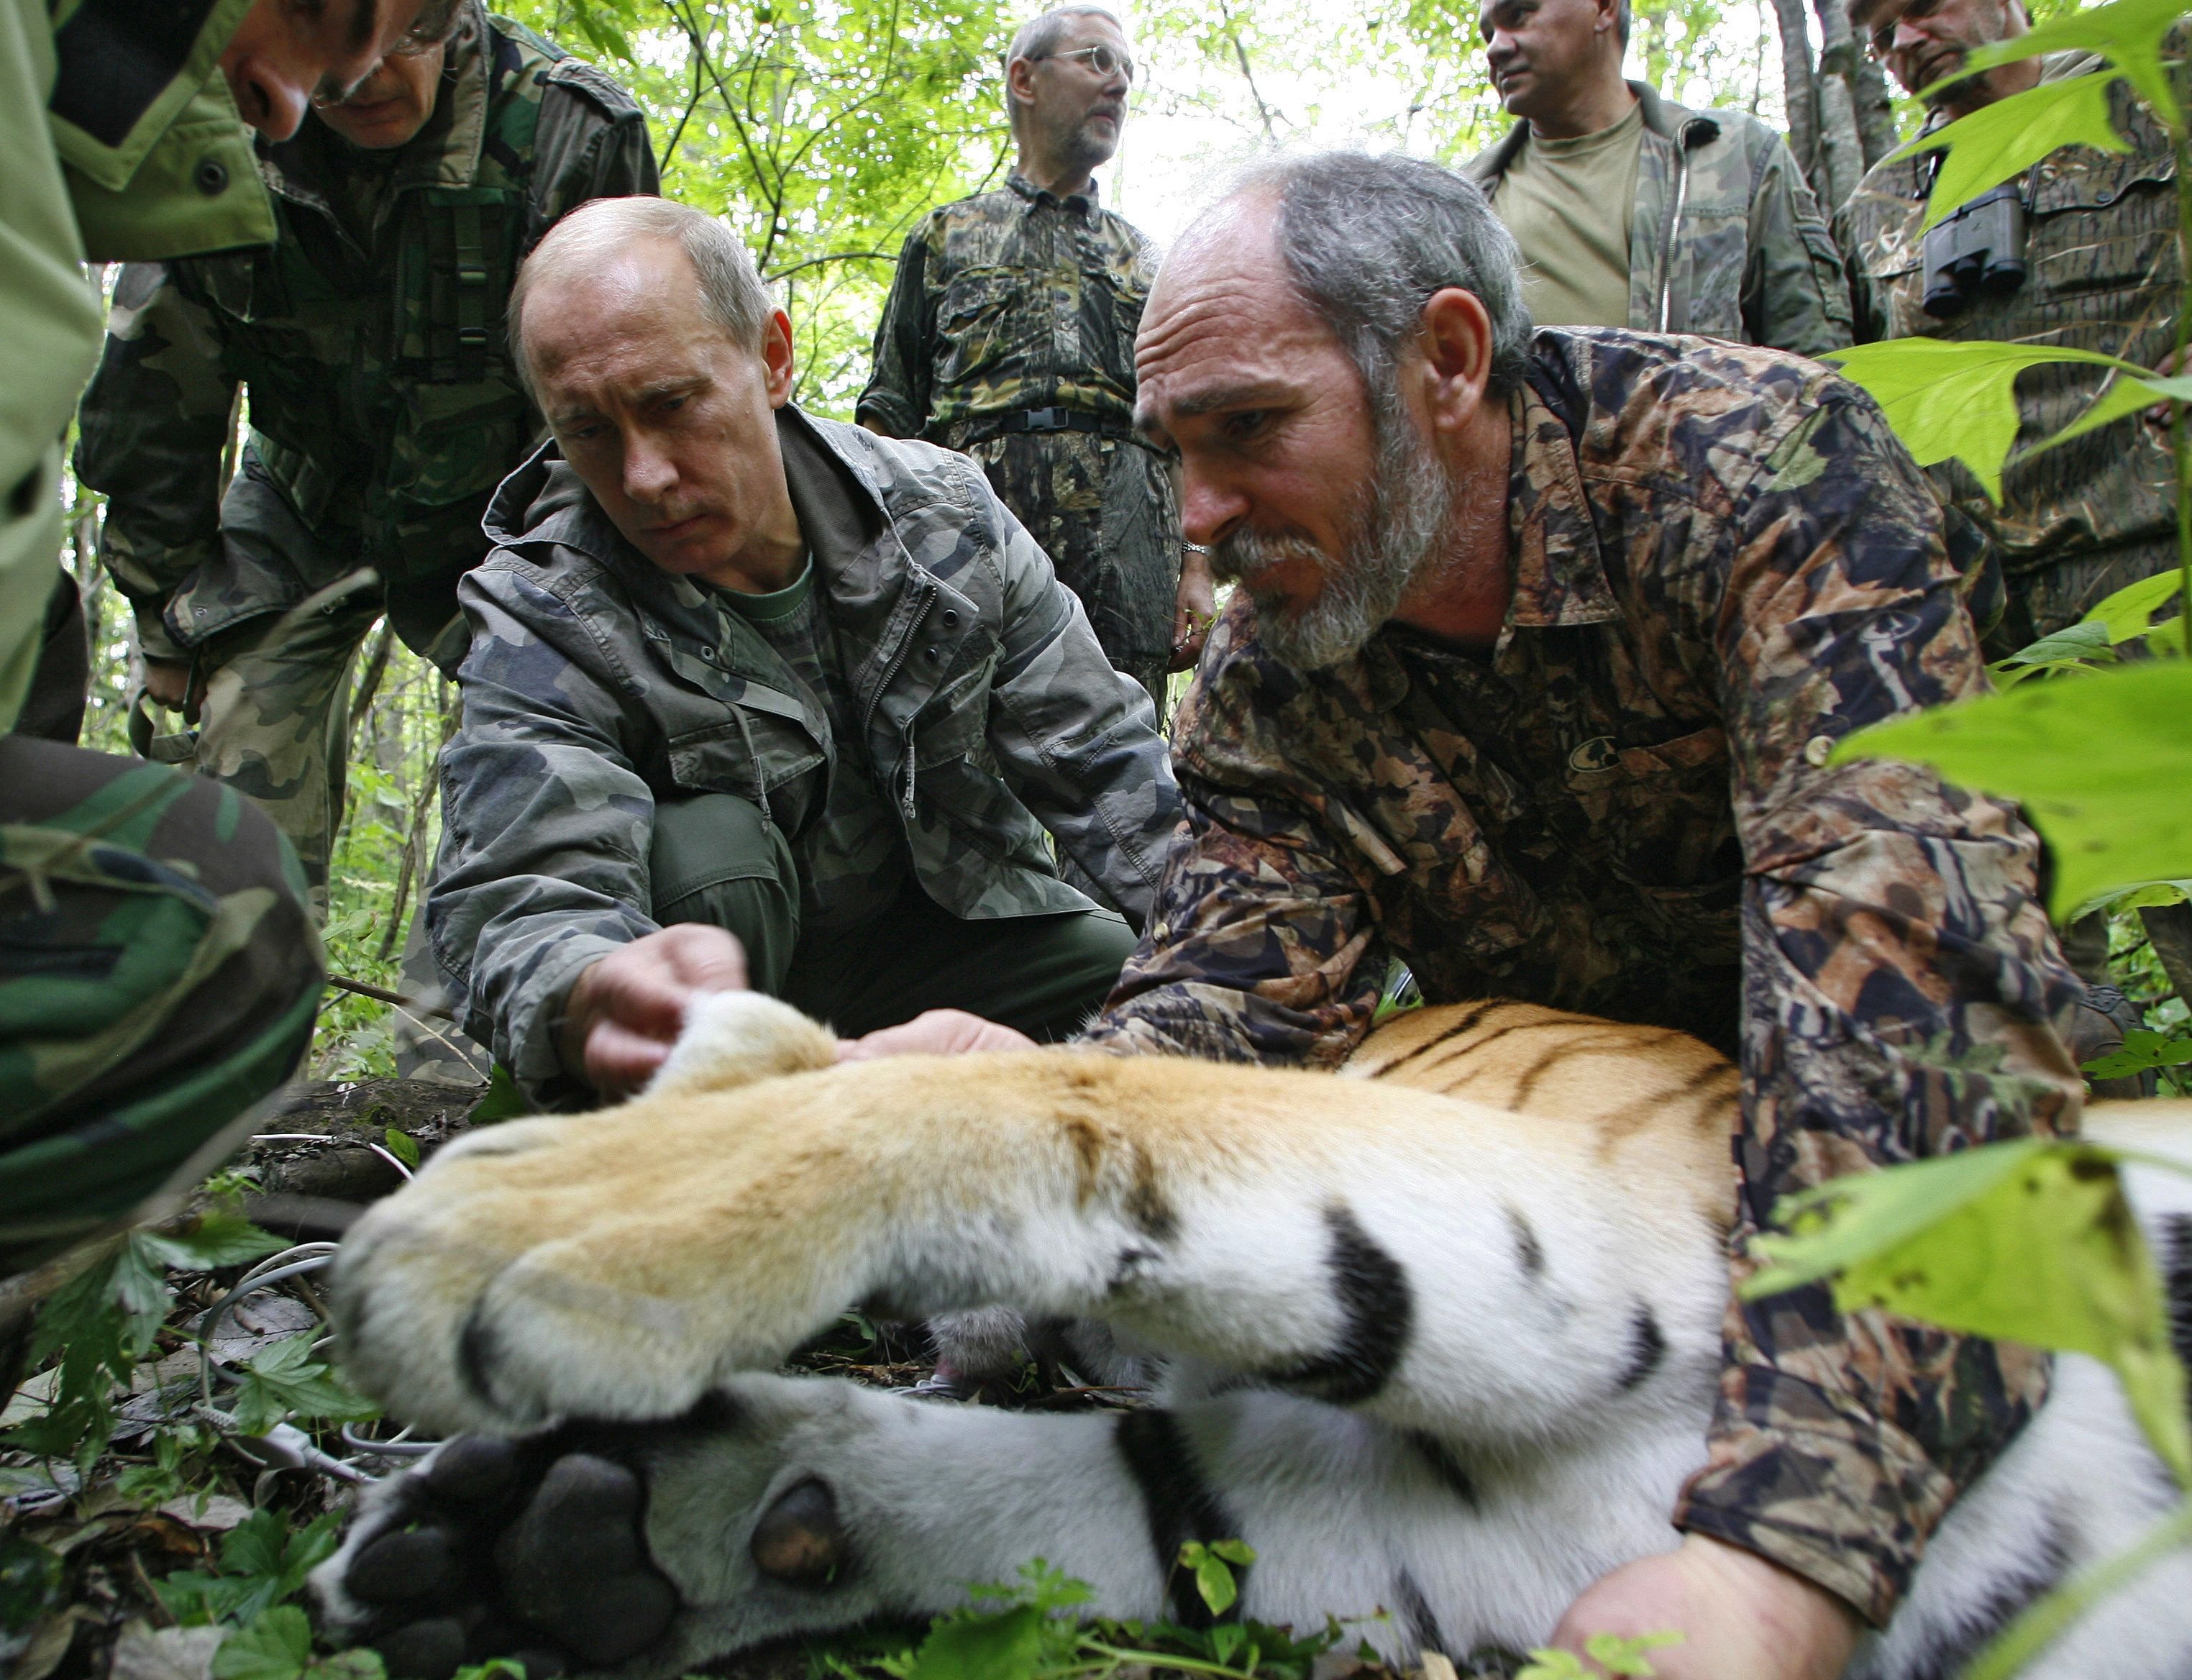 Vladimir Putin is photographed next to a tranquilised tiger